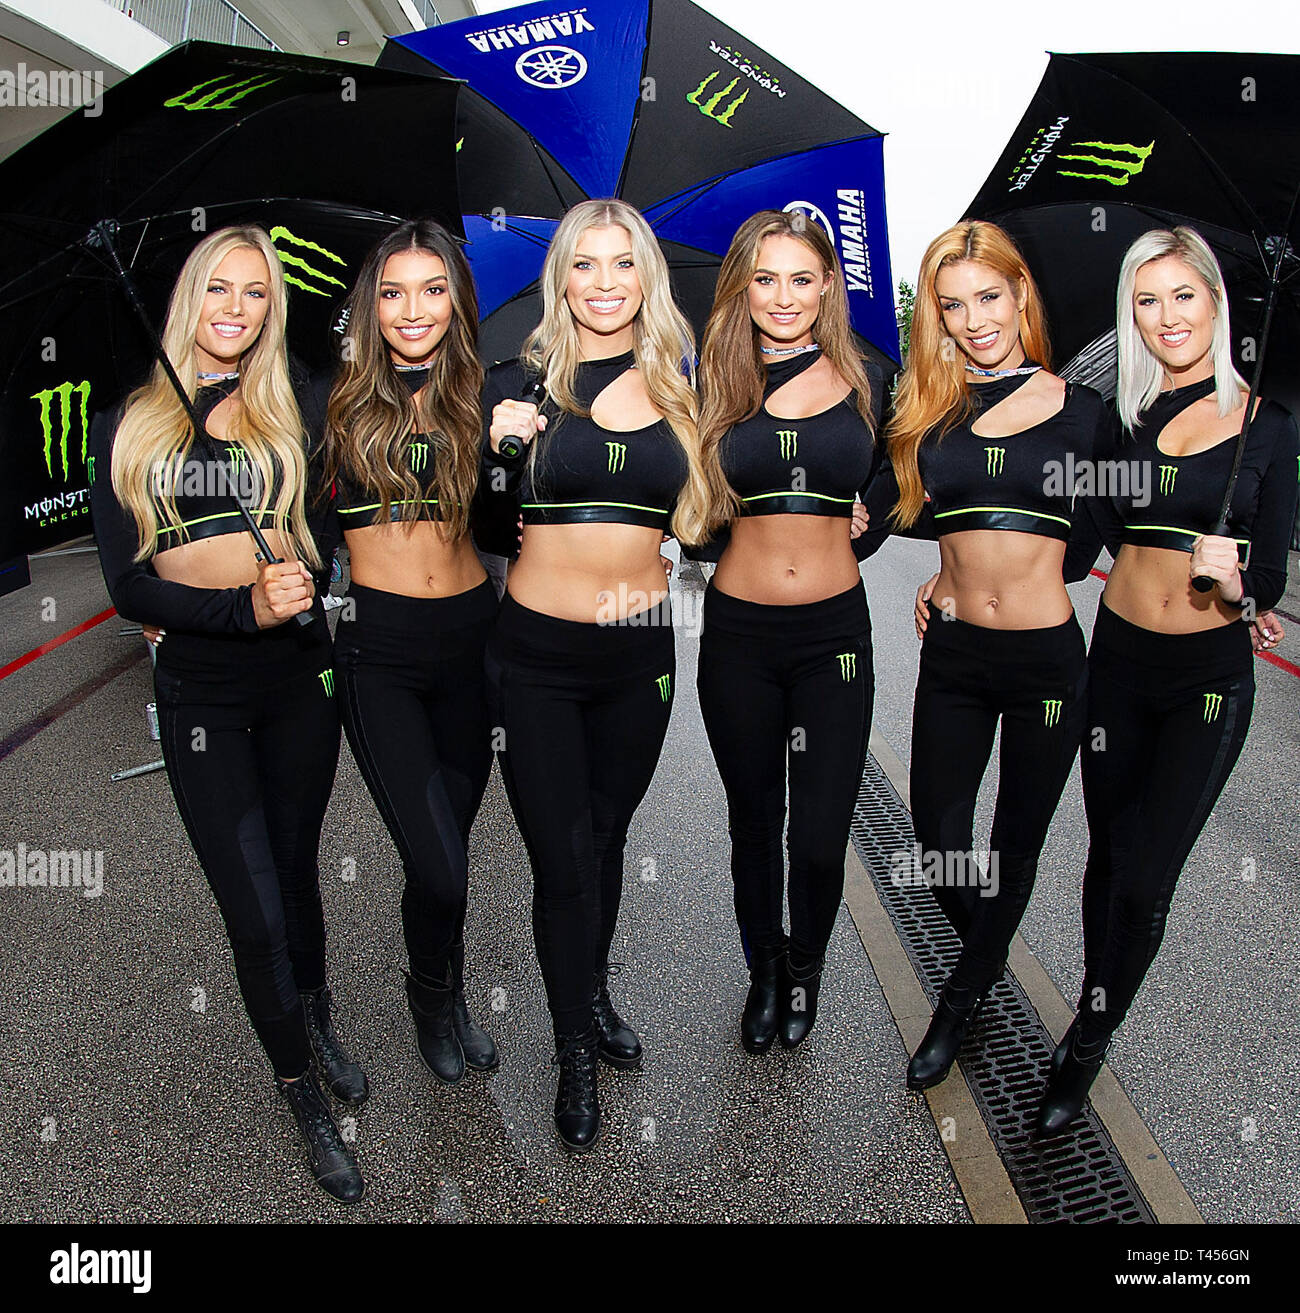 April 13, 2019: Monster Paddock Girls in action before the start of MotoGP  Free Practice 3 at the Red Bull Grand Prix of the Americas. Austin, Texas.  Mario Cantu/CSM Stock Photo - Alamy